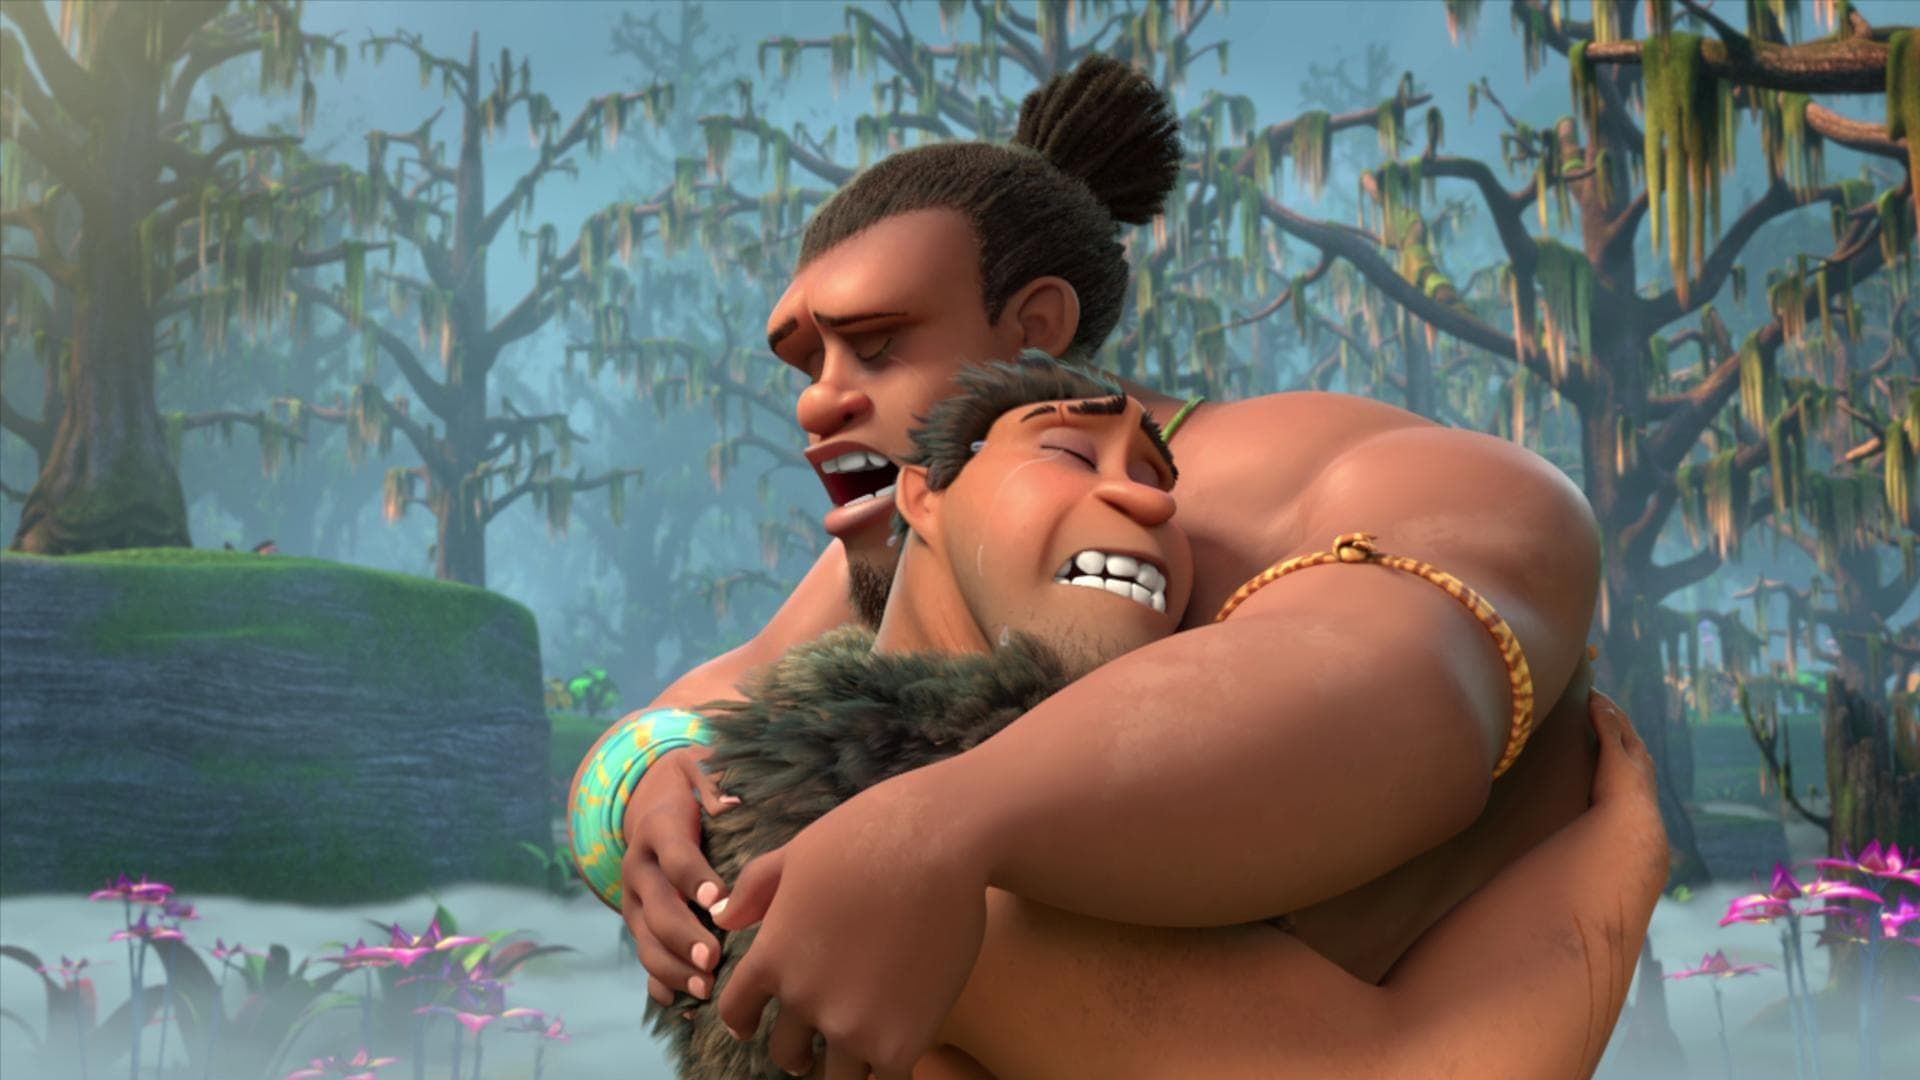 The Croods: Family Tree background